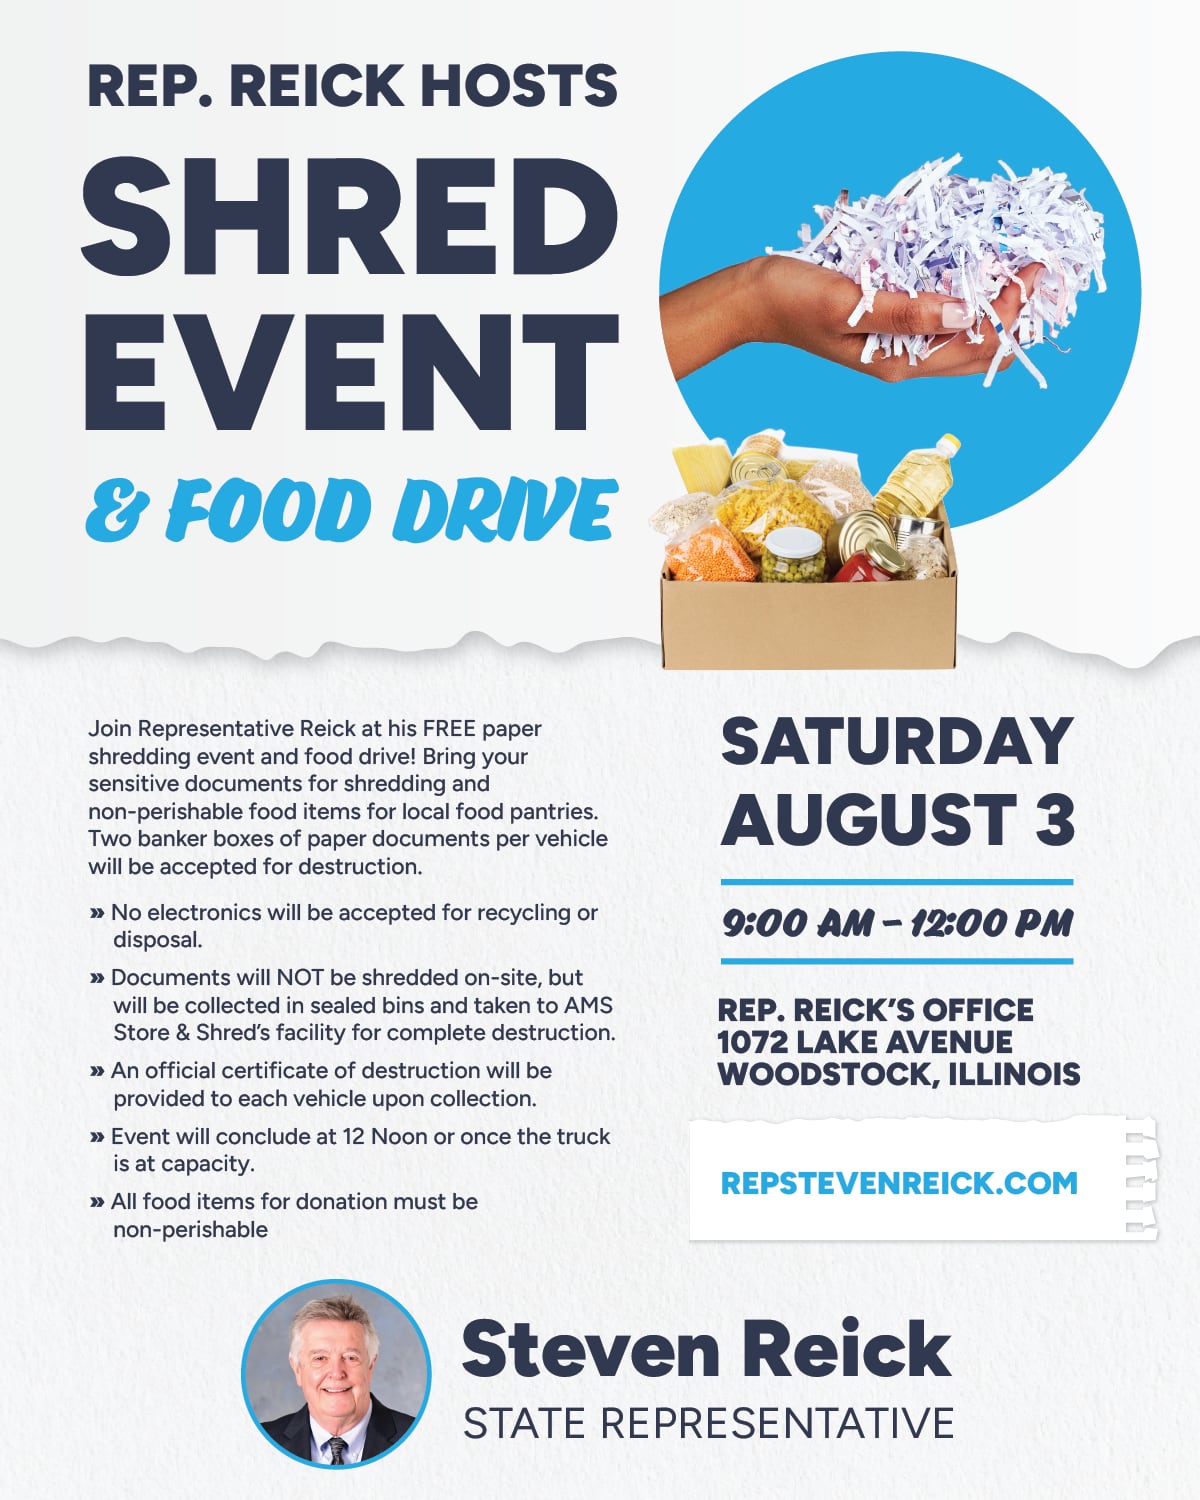 Free paper-shredding and food drive hosted by state Rep. Steve Reick in Woodstock on Saturday